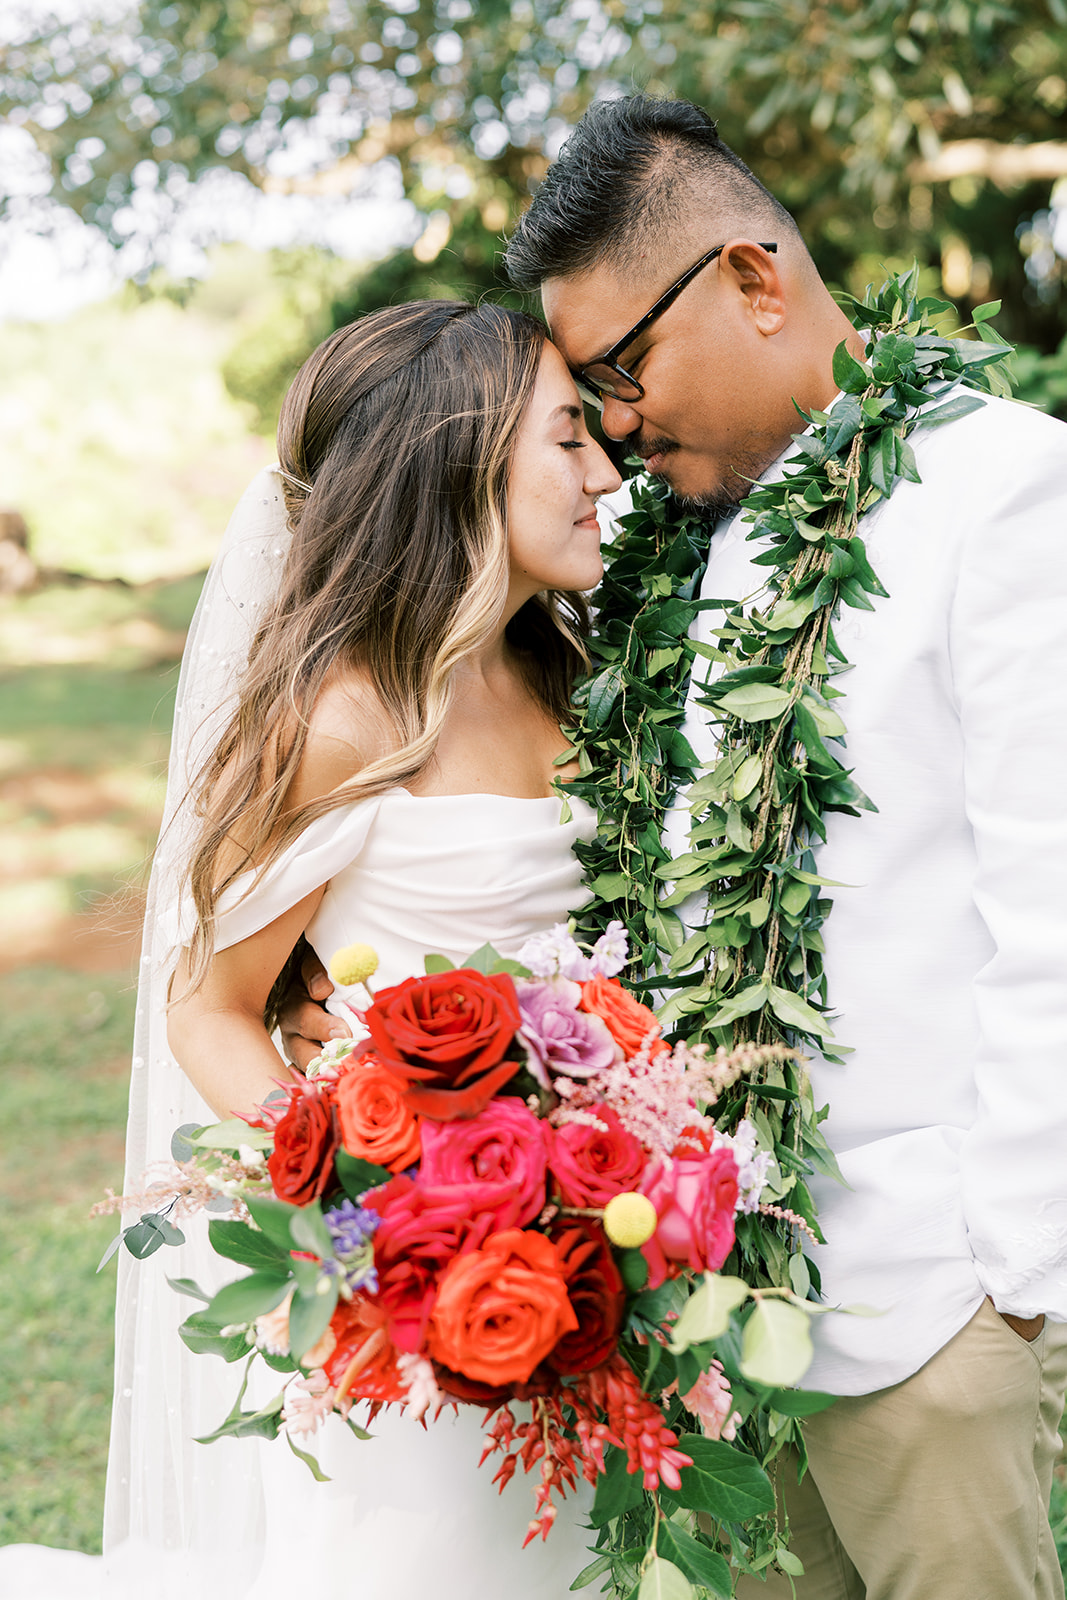 Bride and groom sharing a moment at their Hawaiian wedding, surrounded by greenery in Kauai